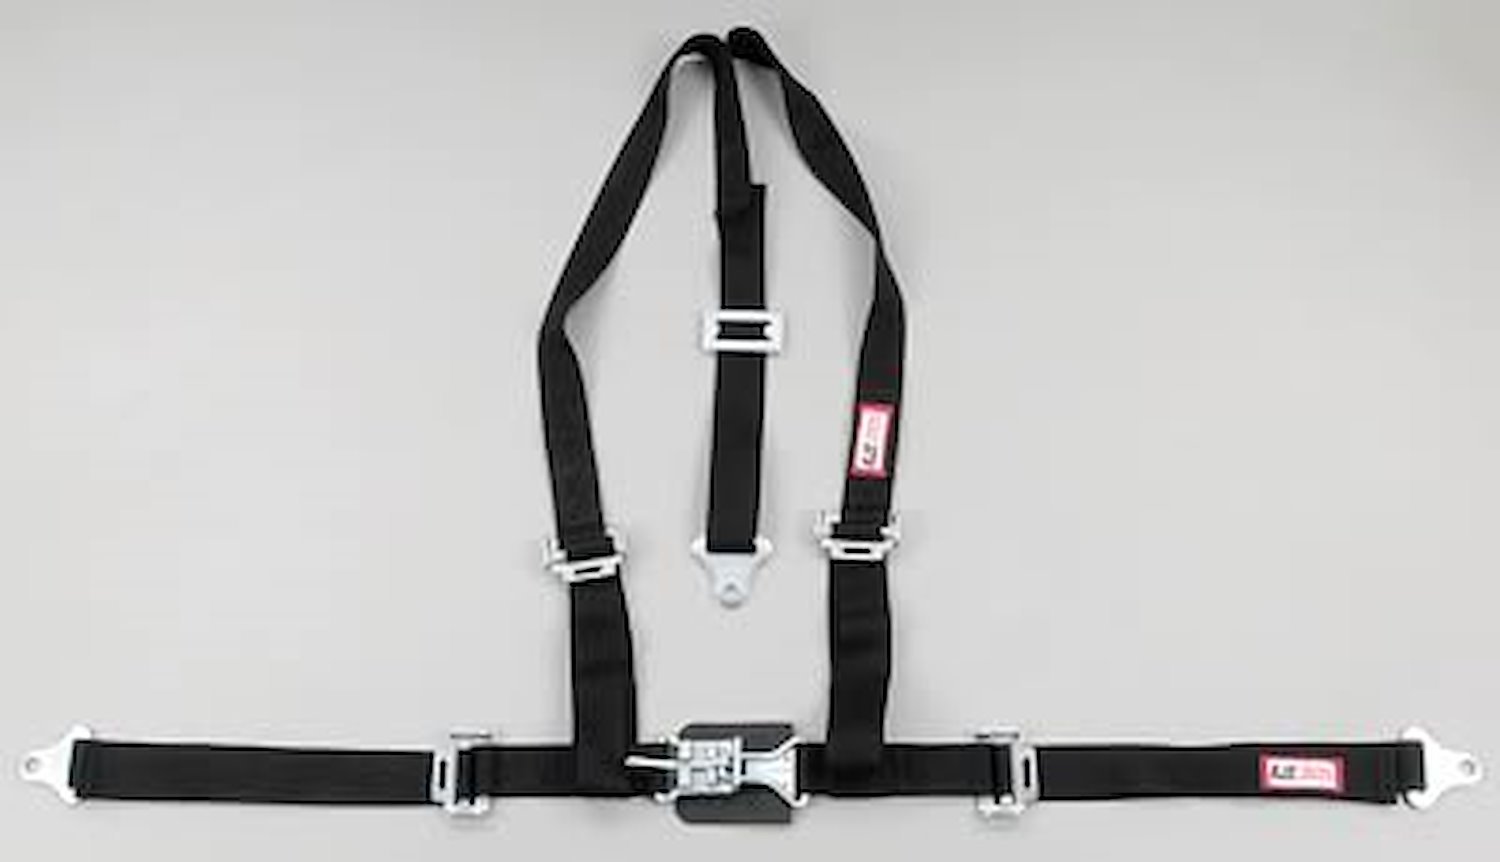 NON-SFI L&L HARNESS 2 PULL UP Lap Belt SEWN IN 2 S.H. INDIVIDUAL FLOOR Mount w/STERNUM STRAP ALL WRAP ENDS HOT PINK